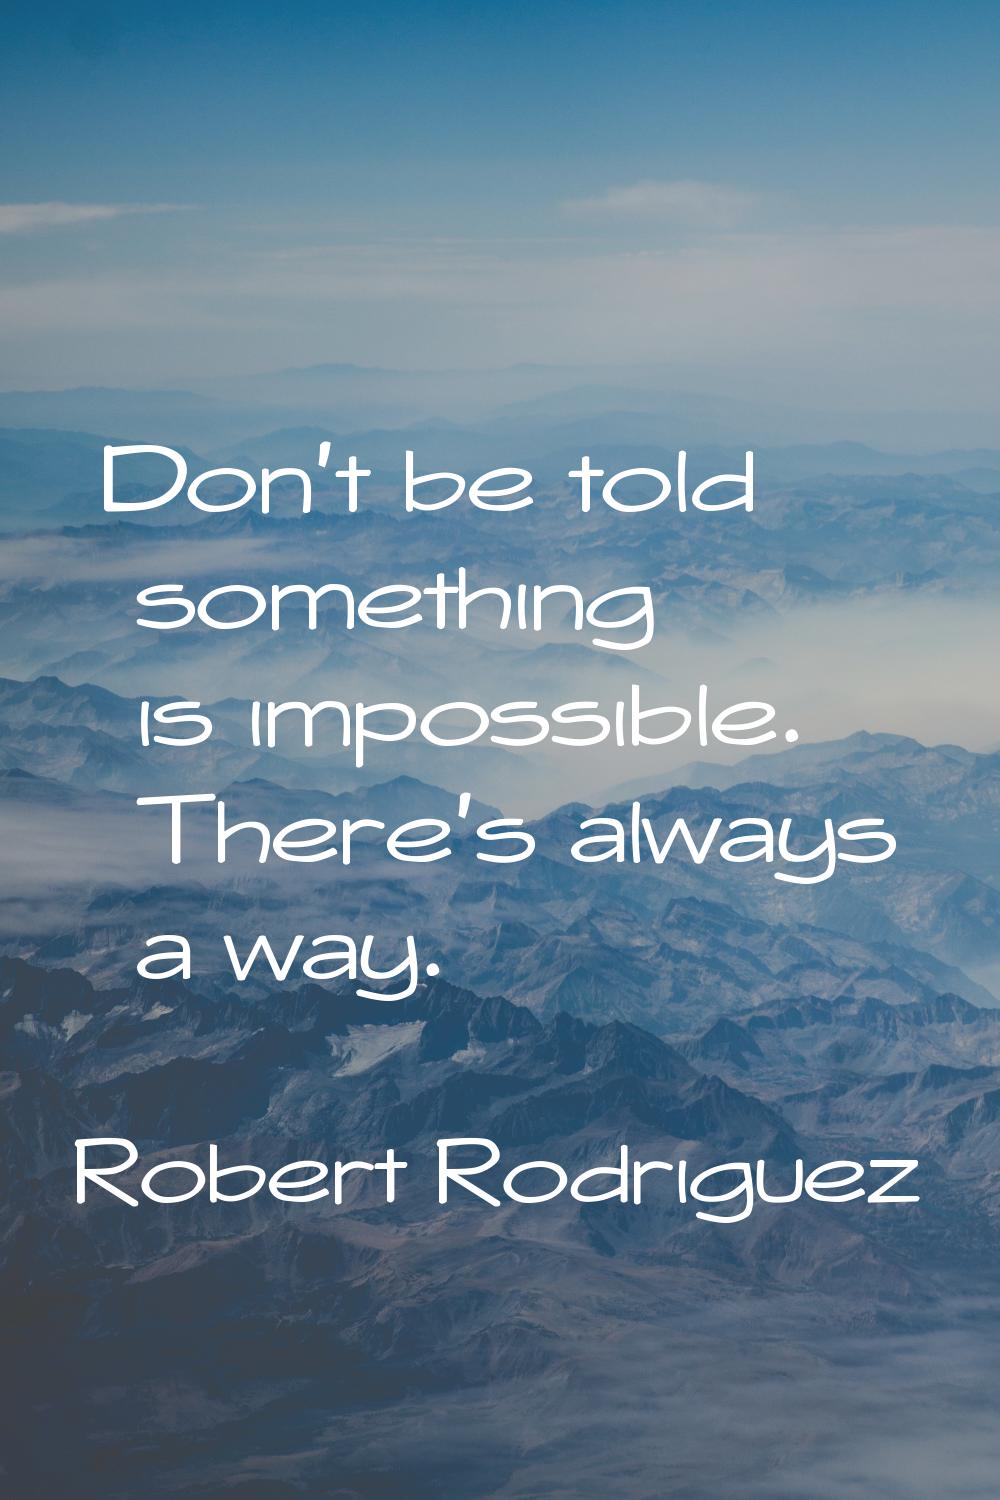 Don't be told something is impossible. There's always a way.